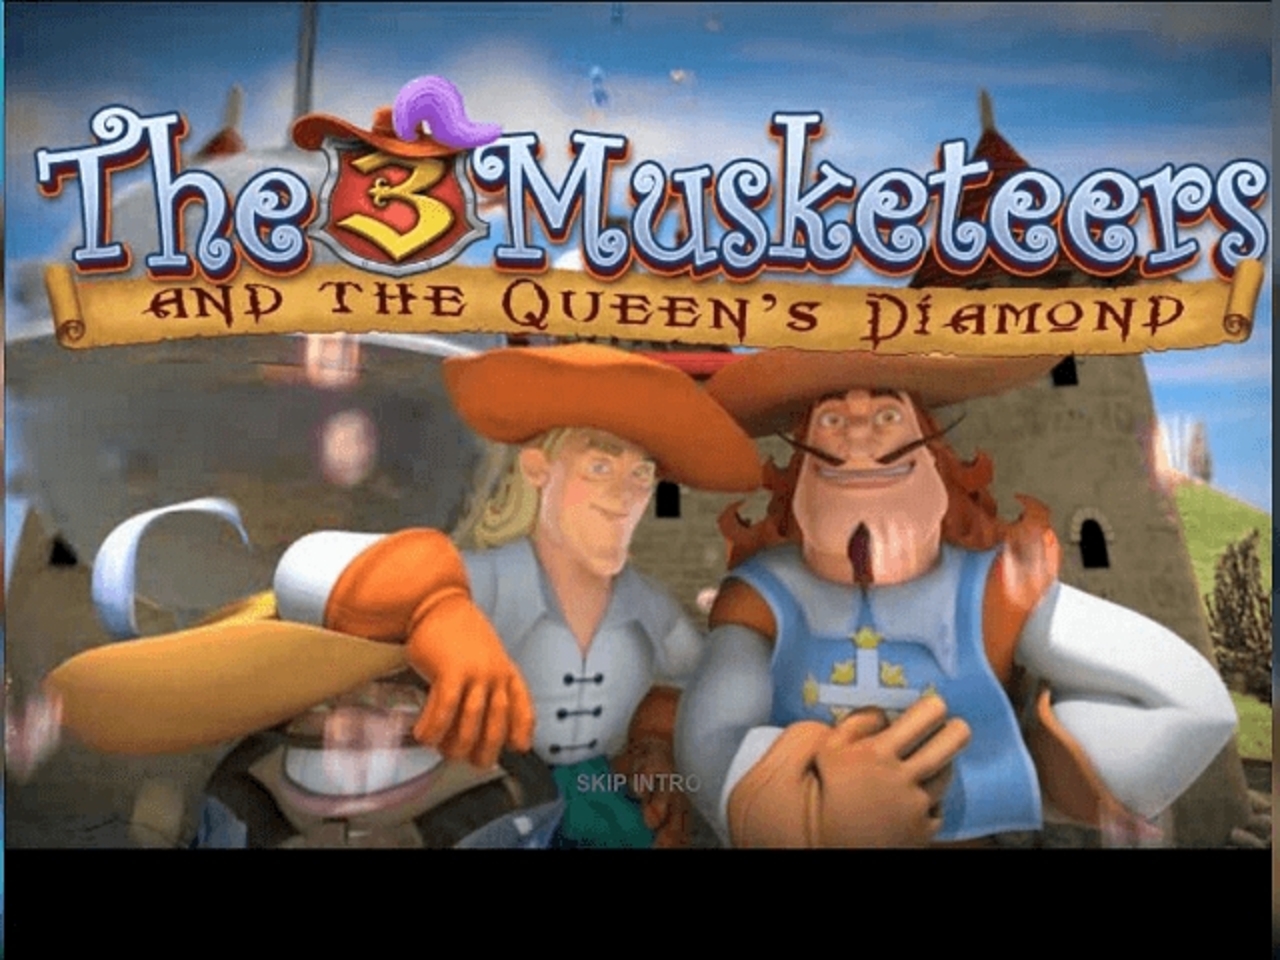 The Three Musketeers and the Queen's Diamond demo